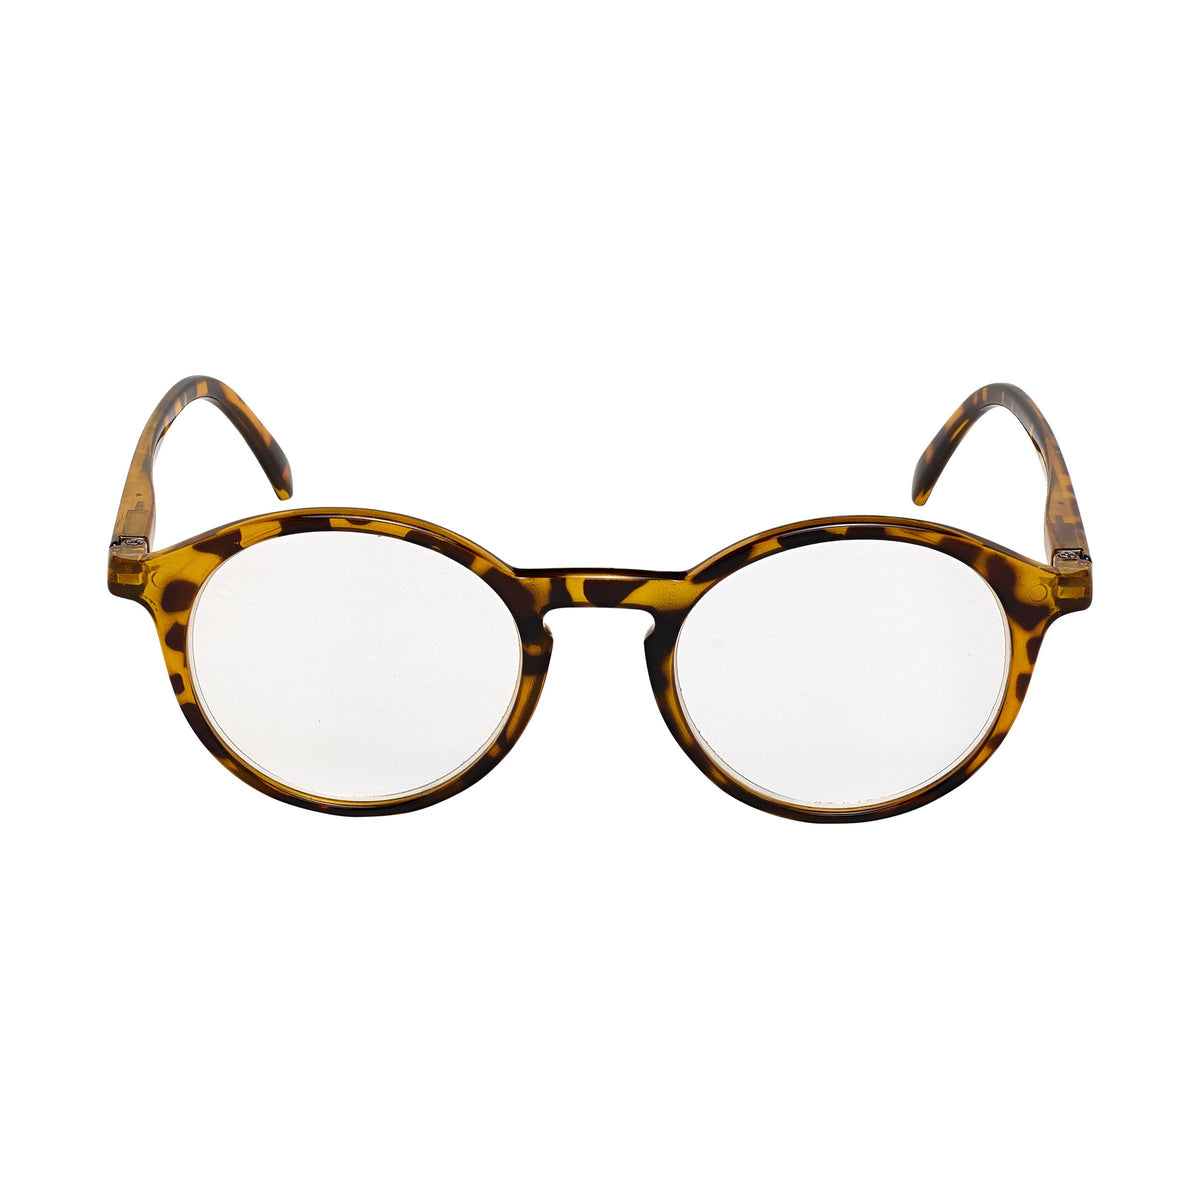 Blue Gem Brown and Tan Speckled Rounded Readers